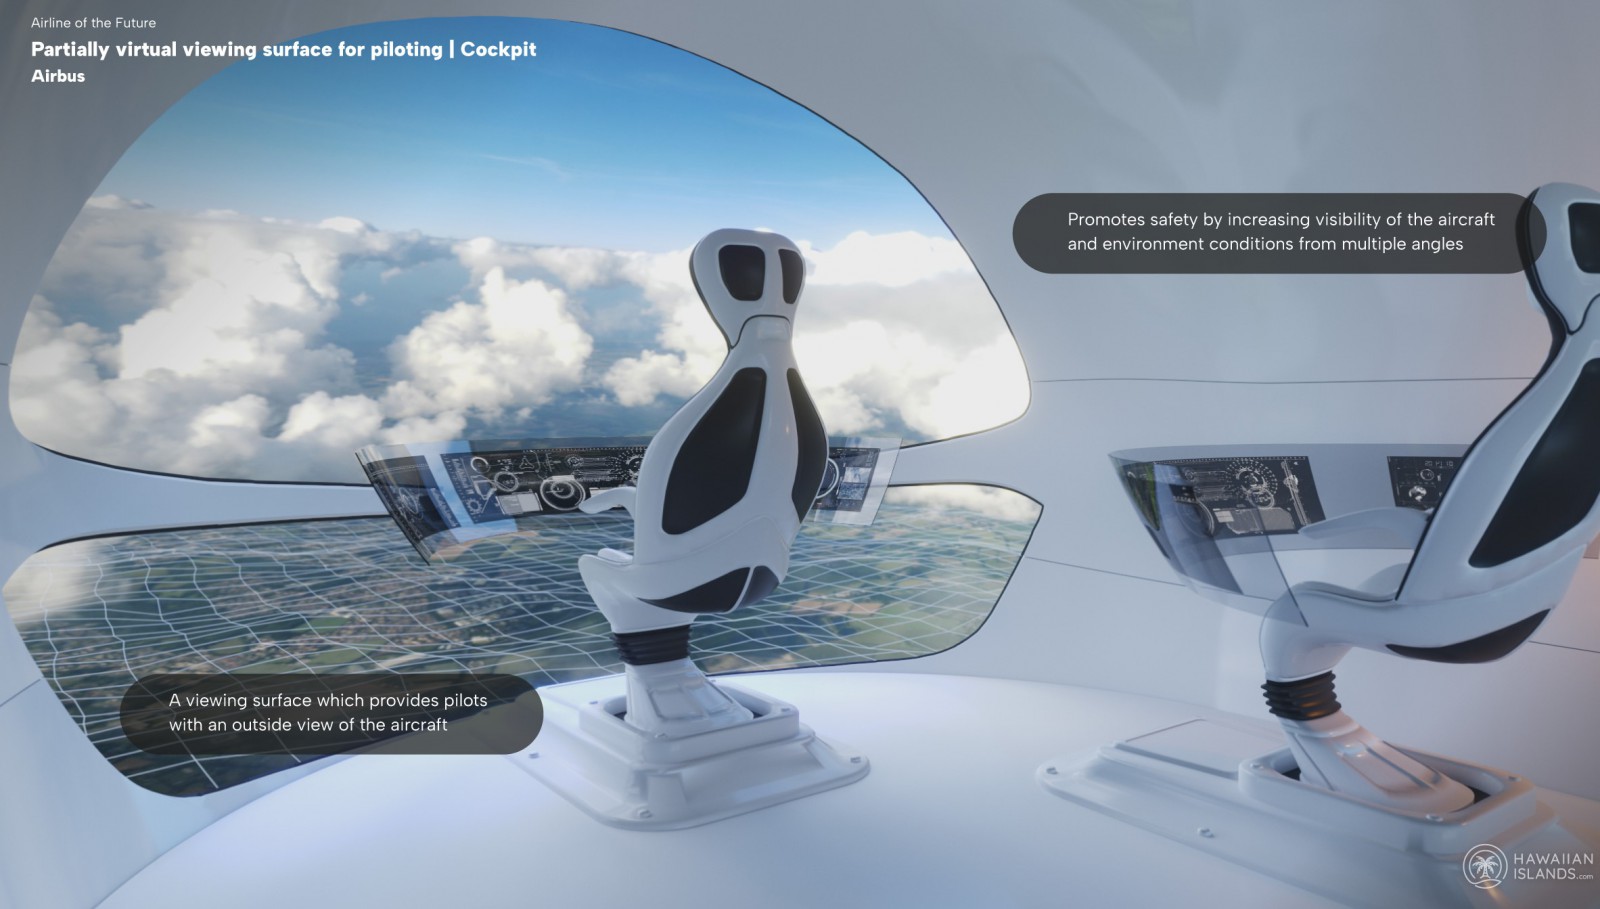 Is This The Future Of Flight For Passengers?